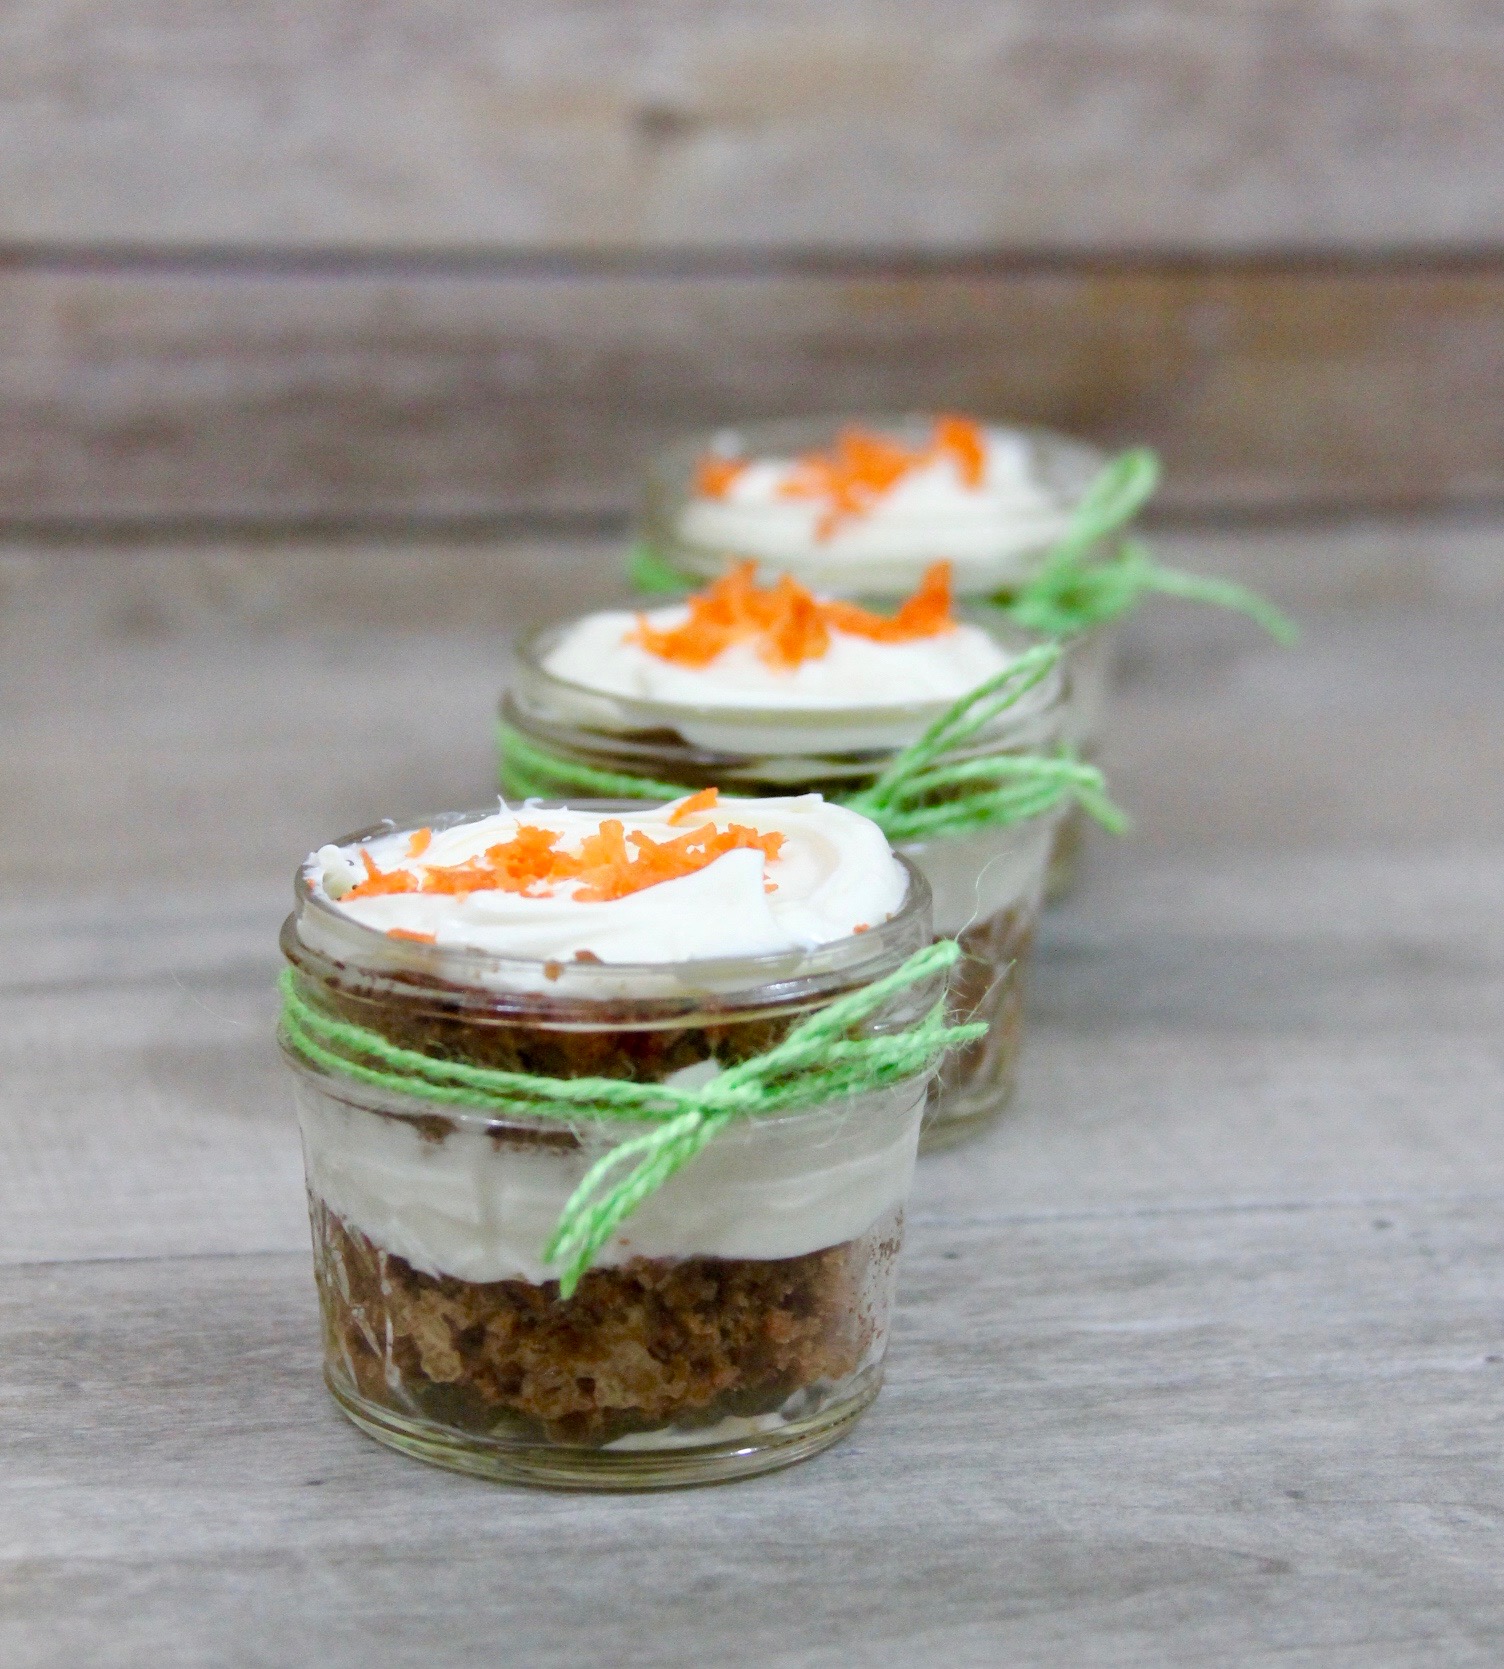 Carrot cake tres leches in a jar